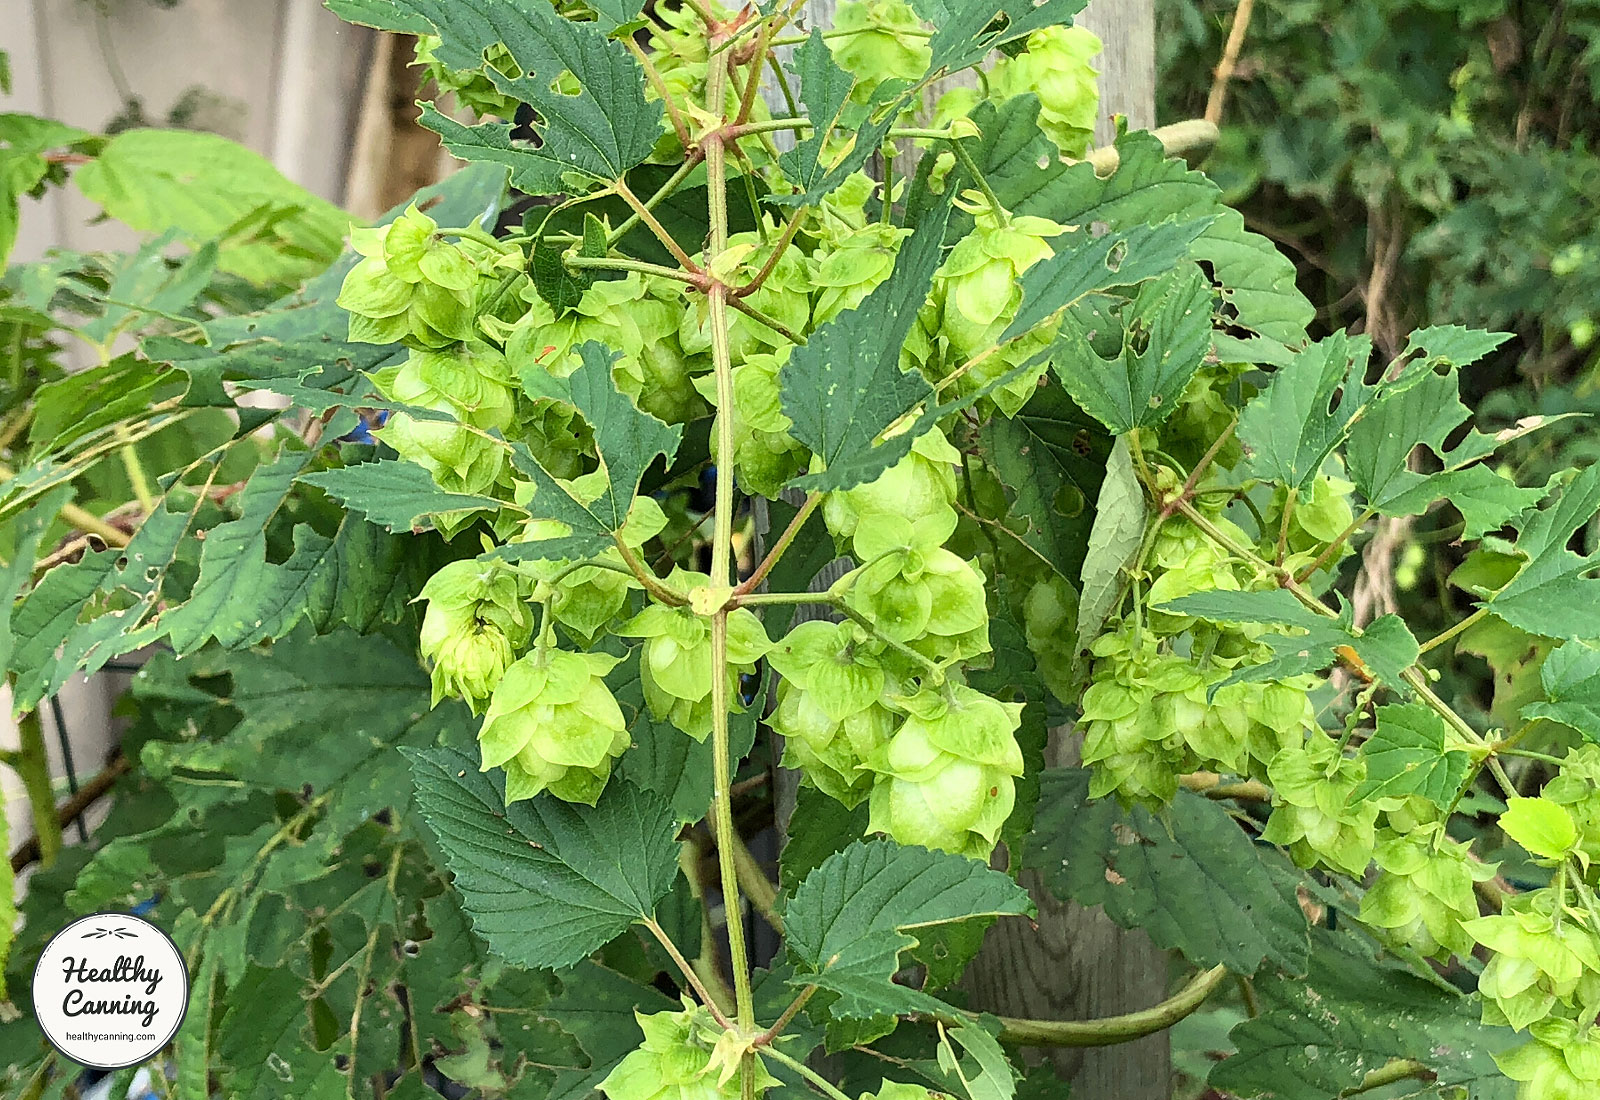 Hop cones ripening on a bine